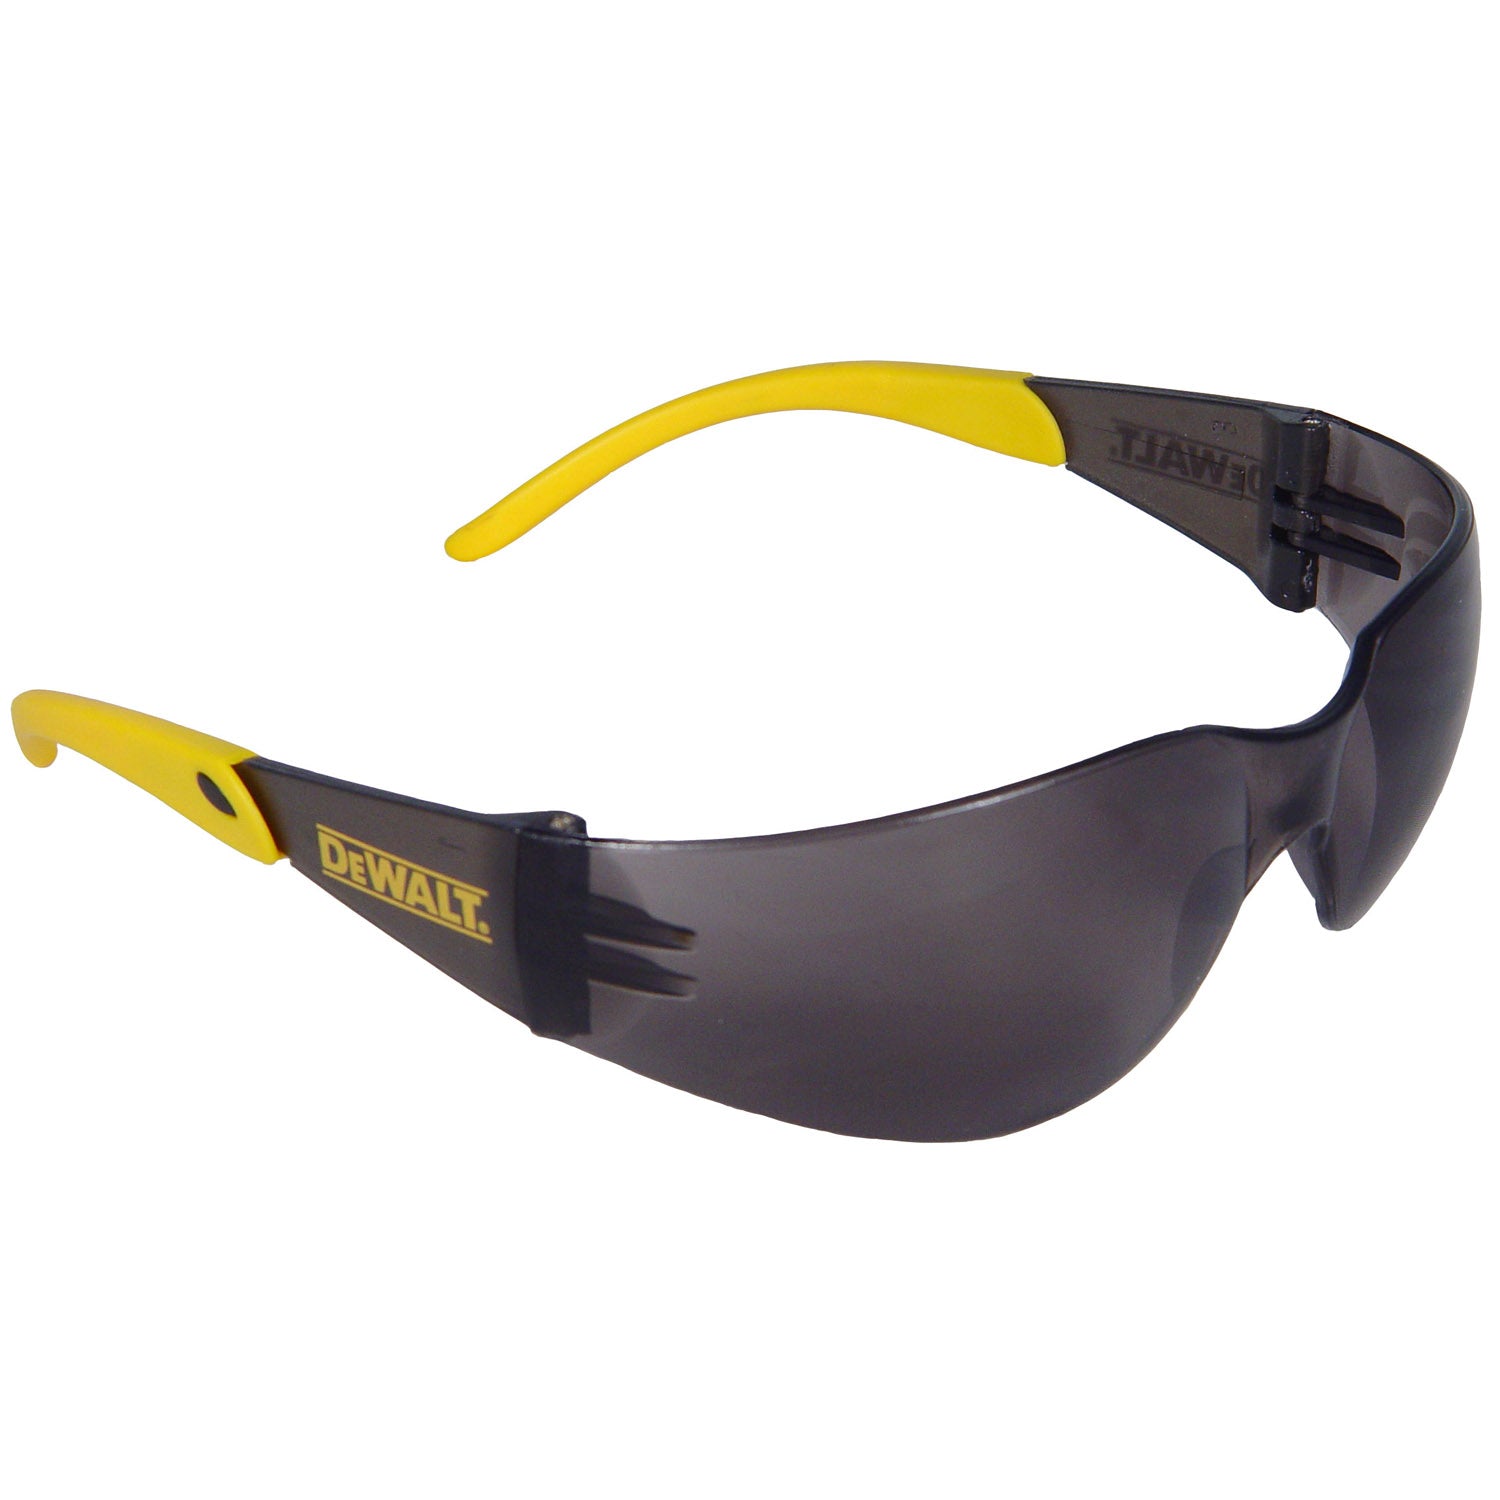 DPG54 Protector Safety Glasses (Box of 12)